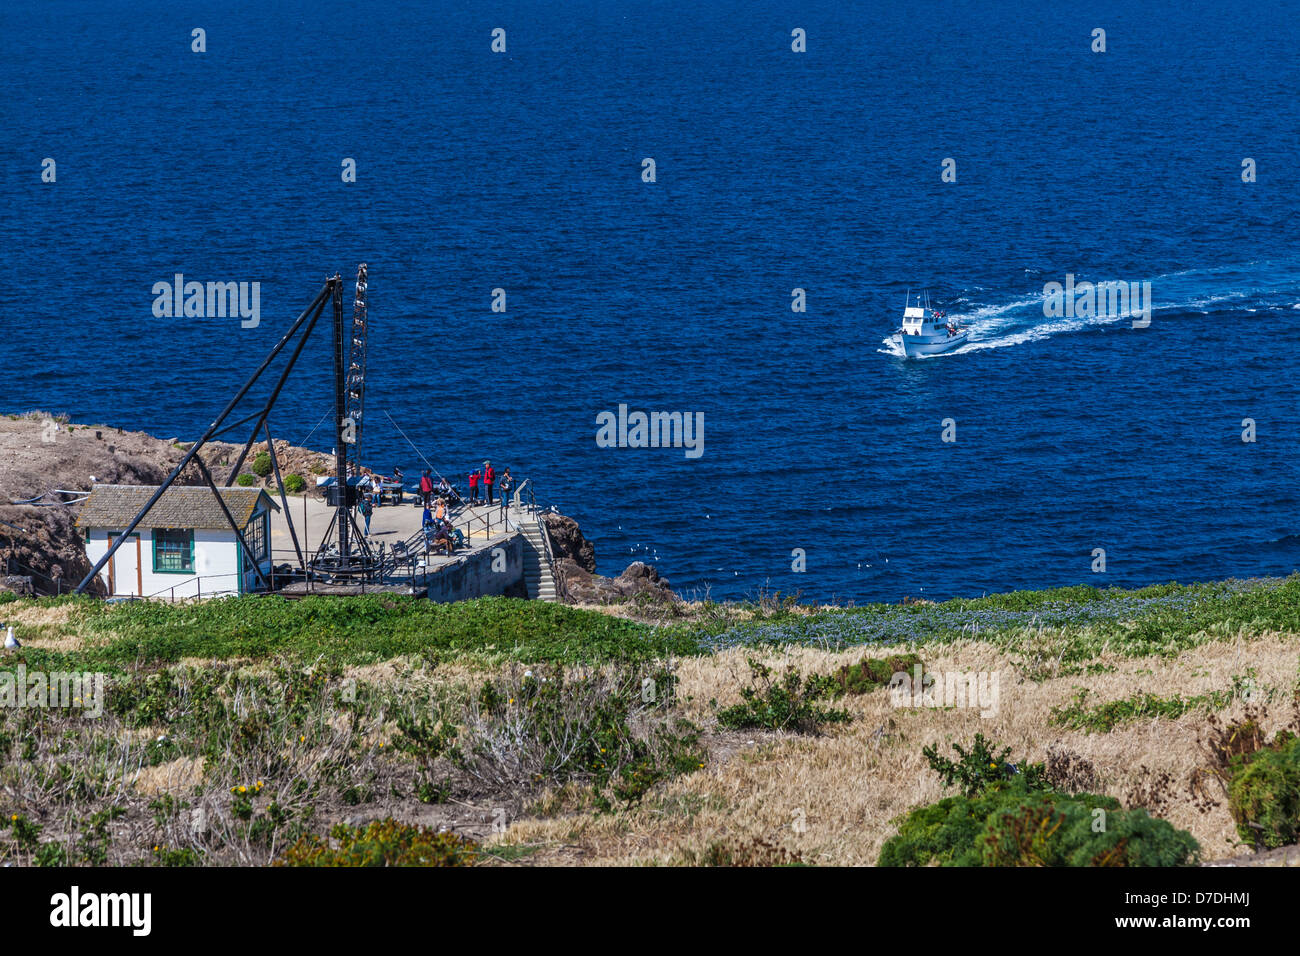 Island Packers boat arriving at the landing cove on East Anacapa Island, Channel Islands National Park, California, USA Stock Photo